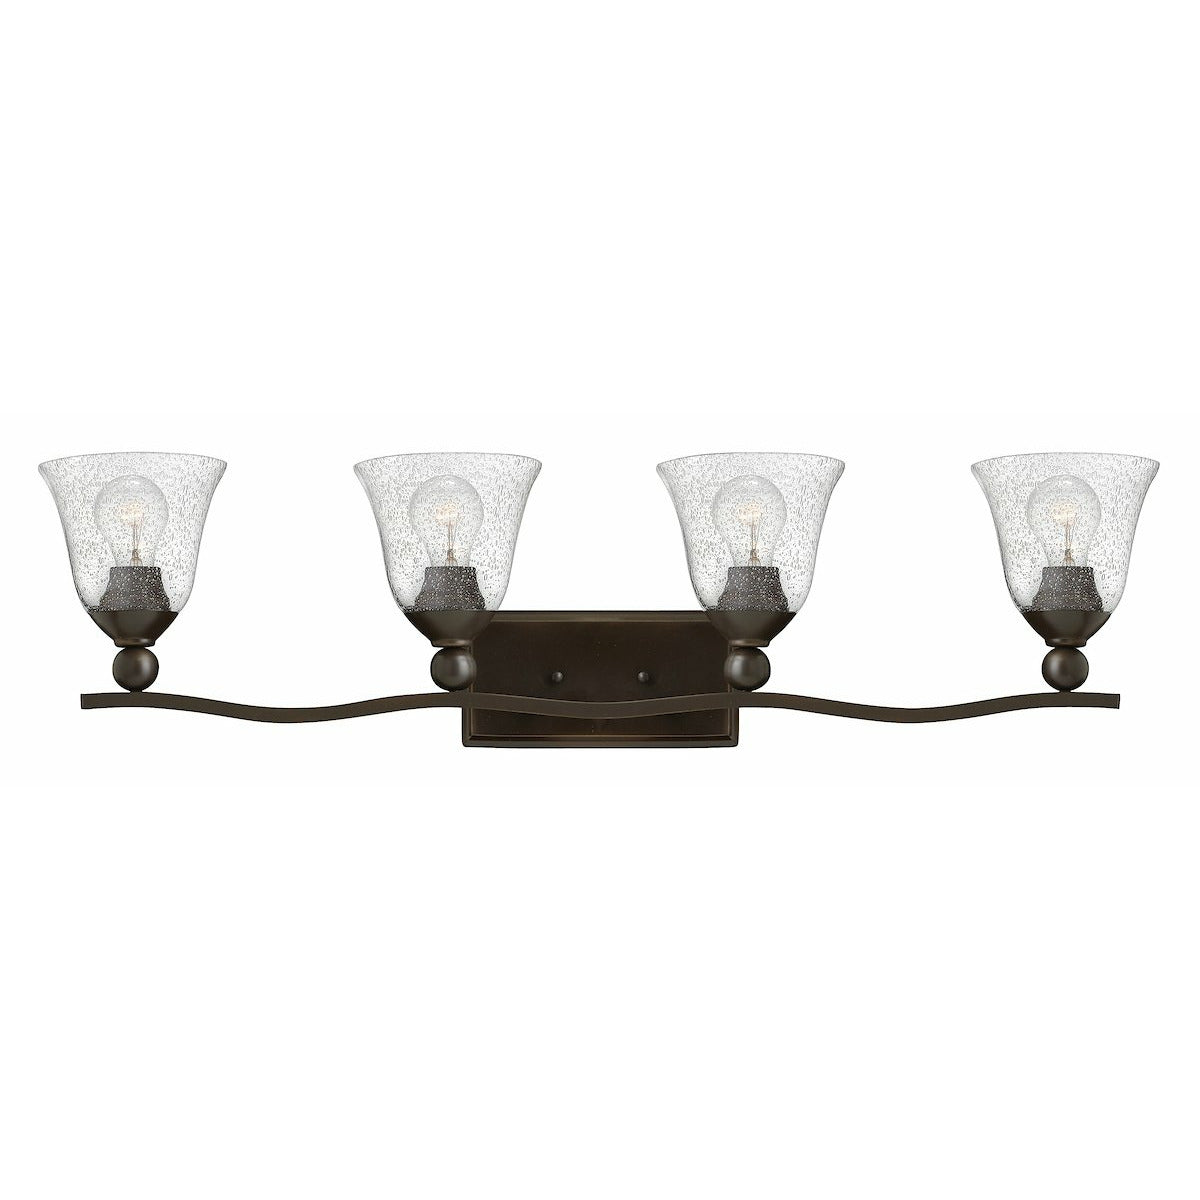 Bolla Vanity Light Olde Bronze with Clear Seedy glass